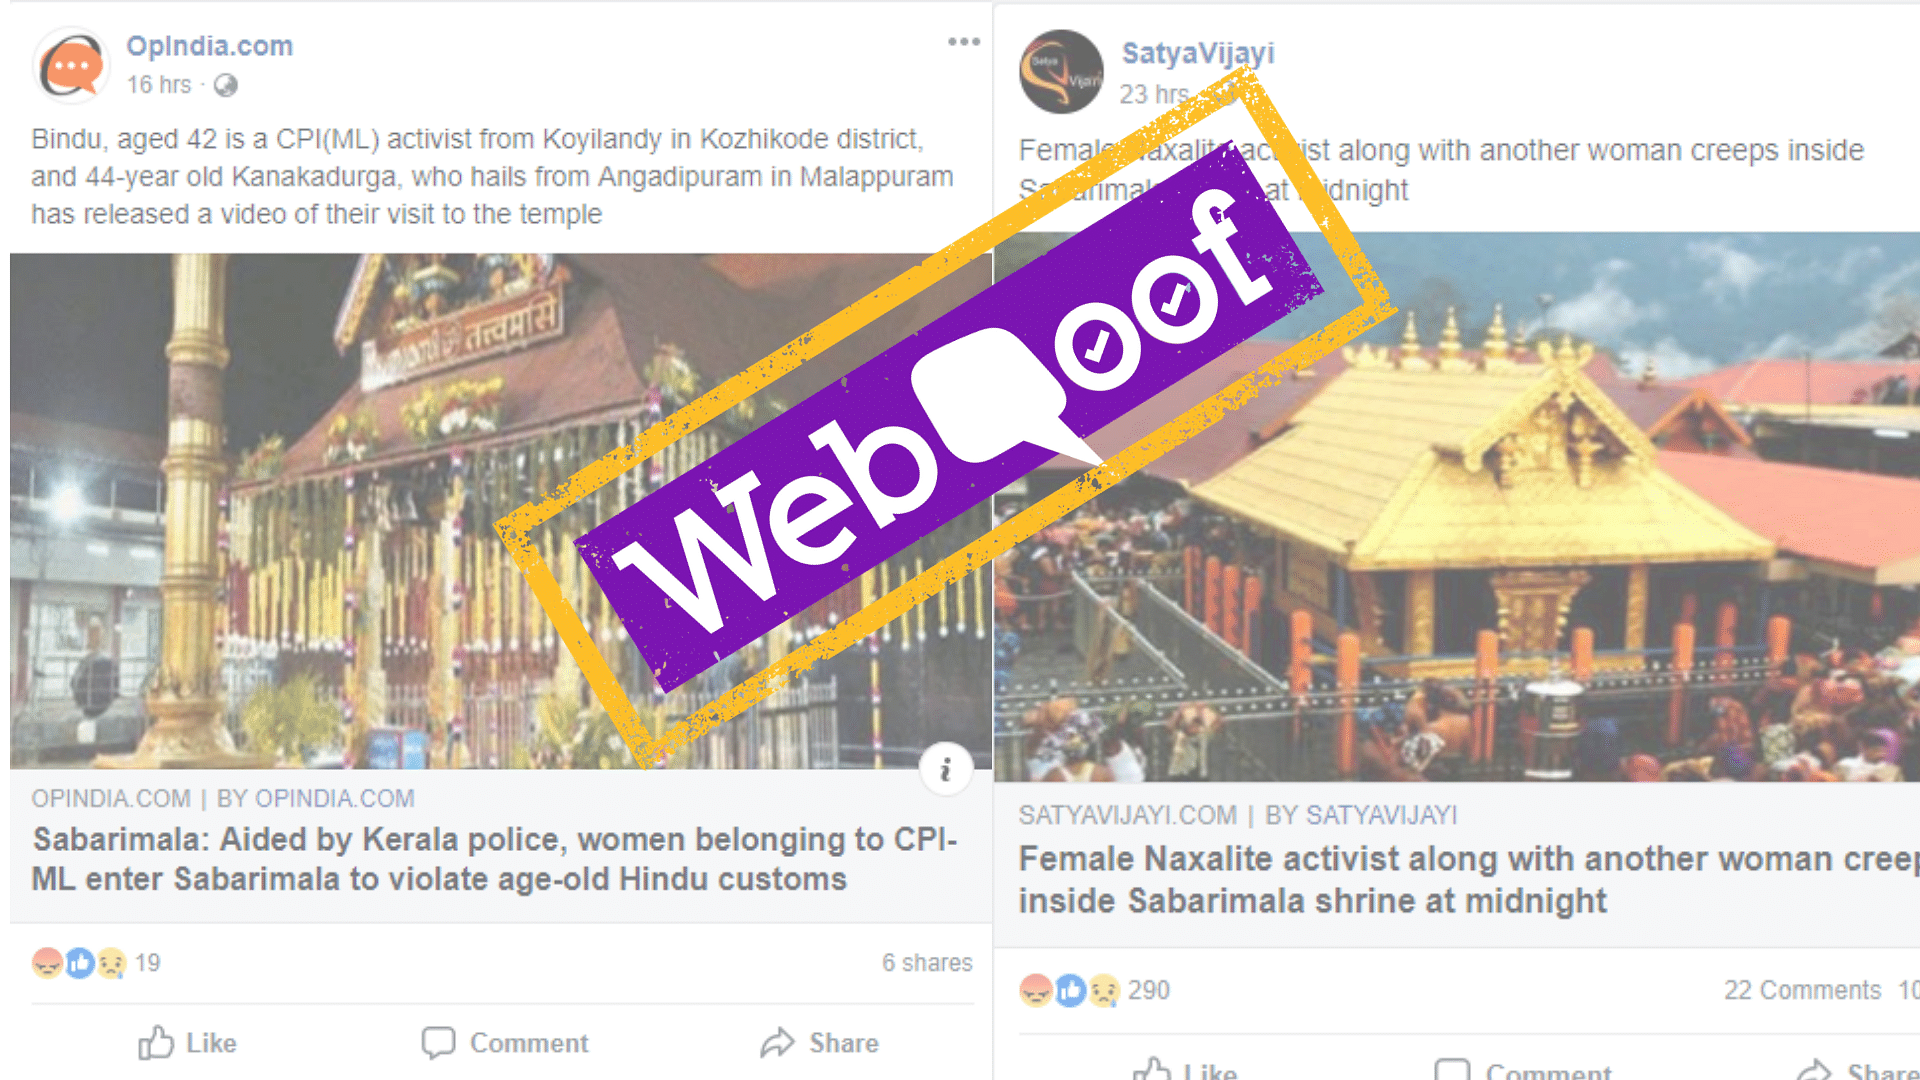 Reports linking the women who entered Sabarimala temple to CPI(ML) are doing the rounds.